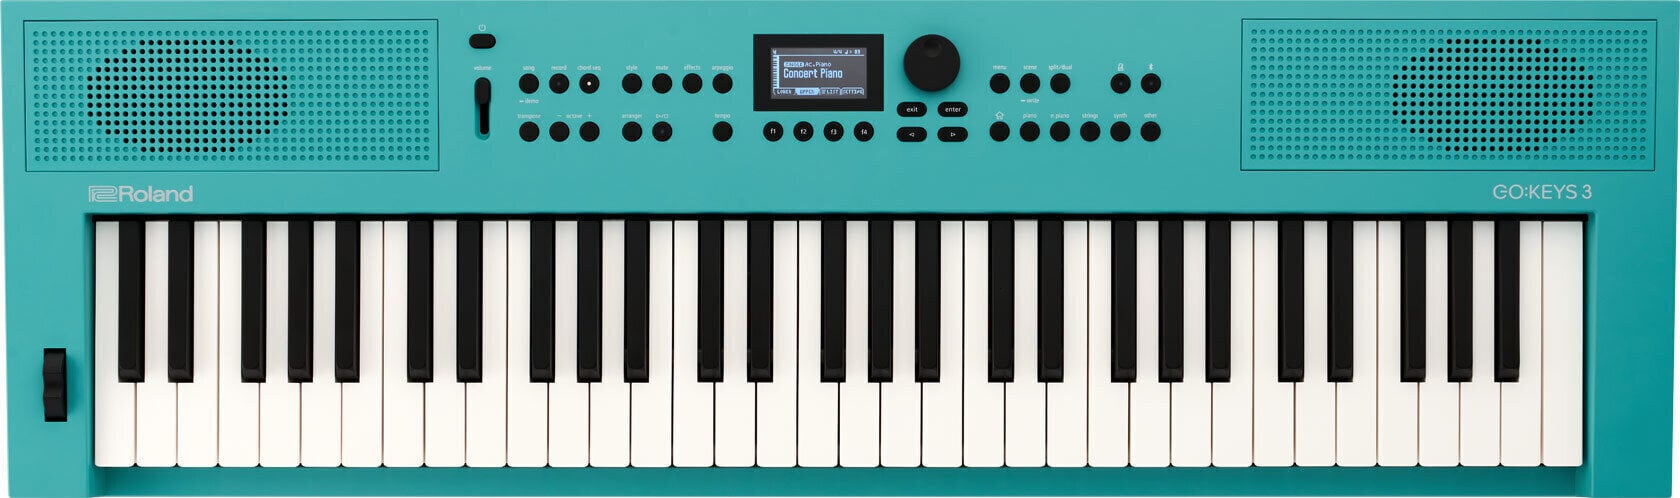 Keyboard mit Touch Response Roland GO:KEYS 3 Turquoise